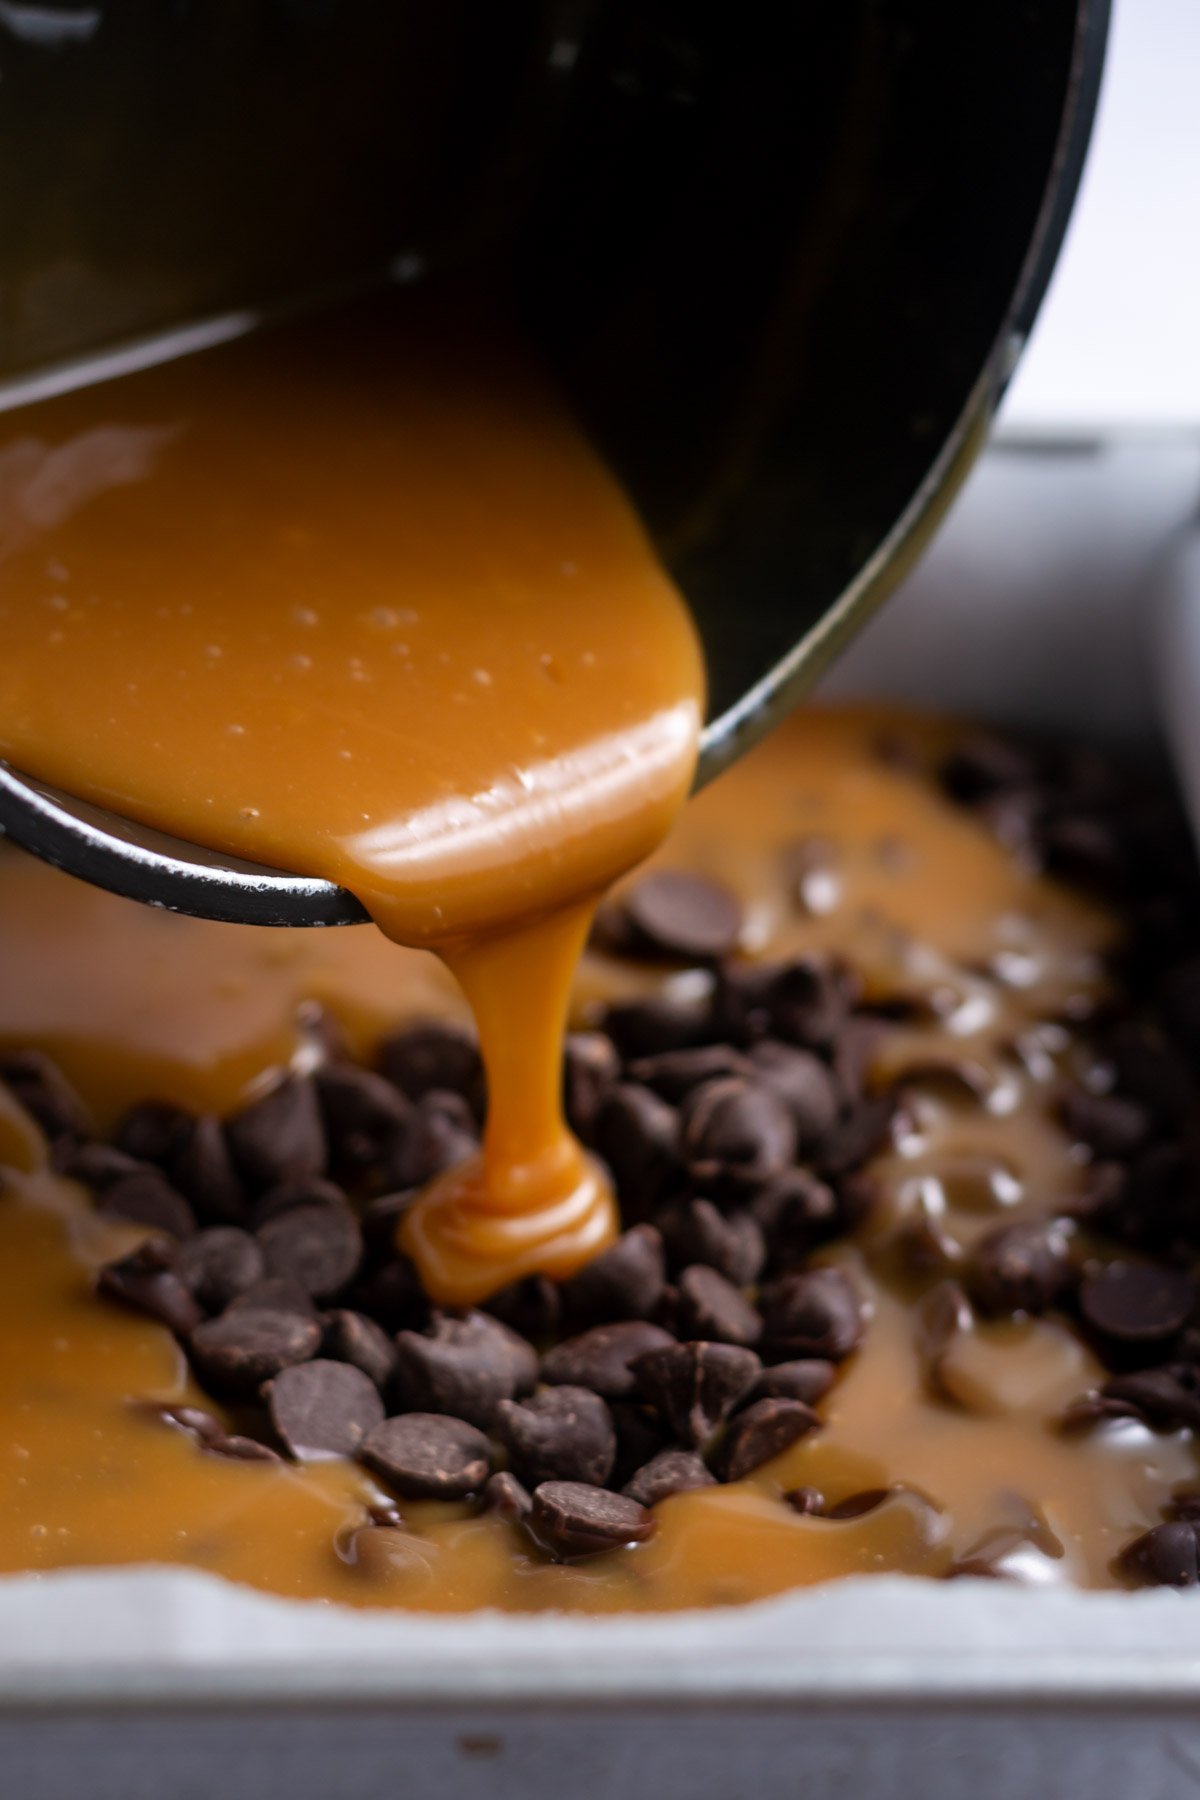 caramel being poured onto chocolate chips